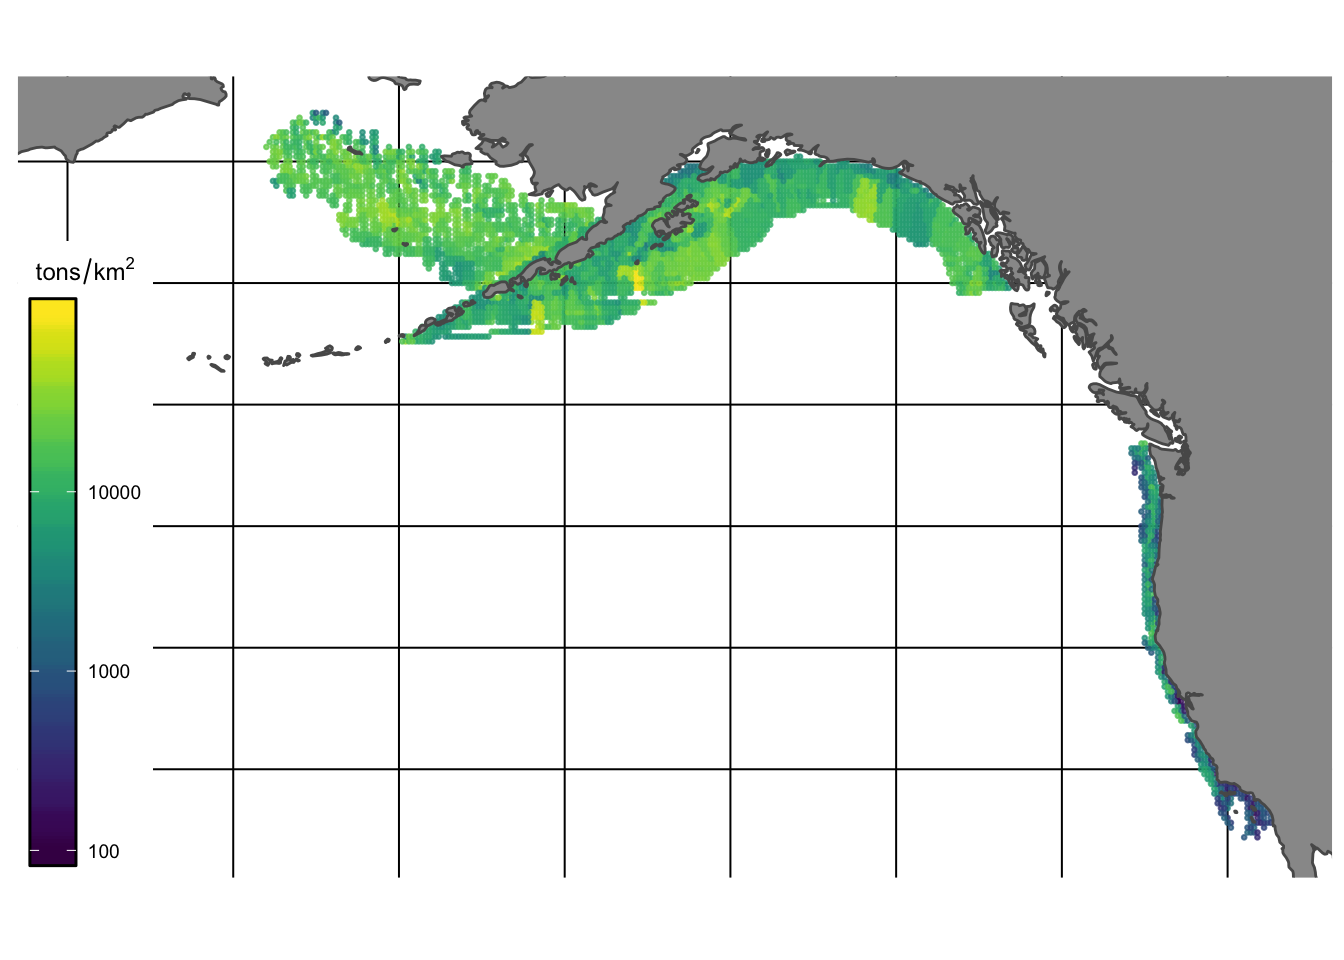 VAST estimates of density (tons/km^2^) of species observed in bottom trawl surveys for the Alaska region - NOTE seems like problem in reported units of trawl survey of AIBTS